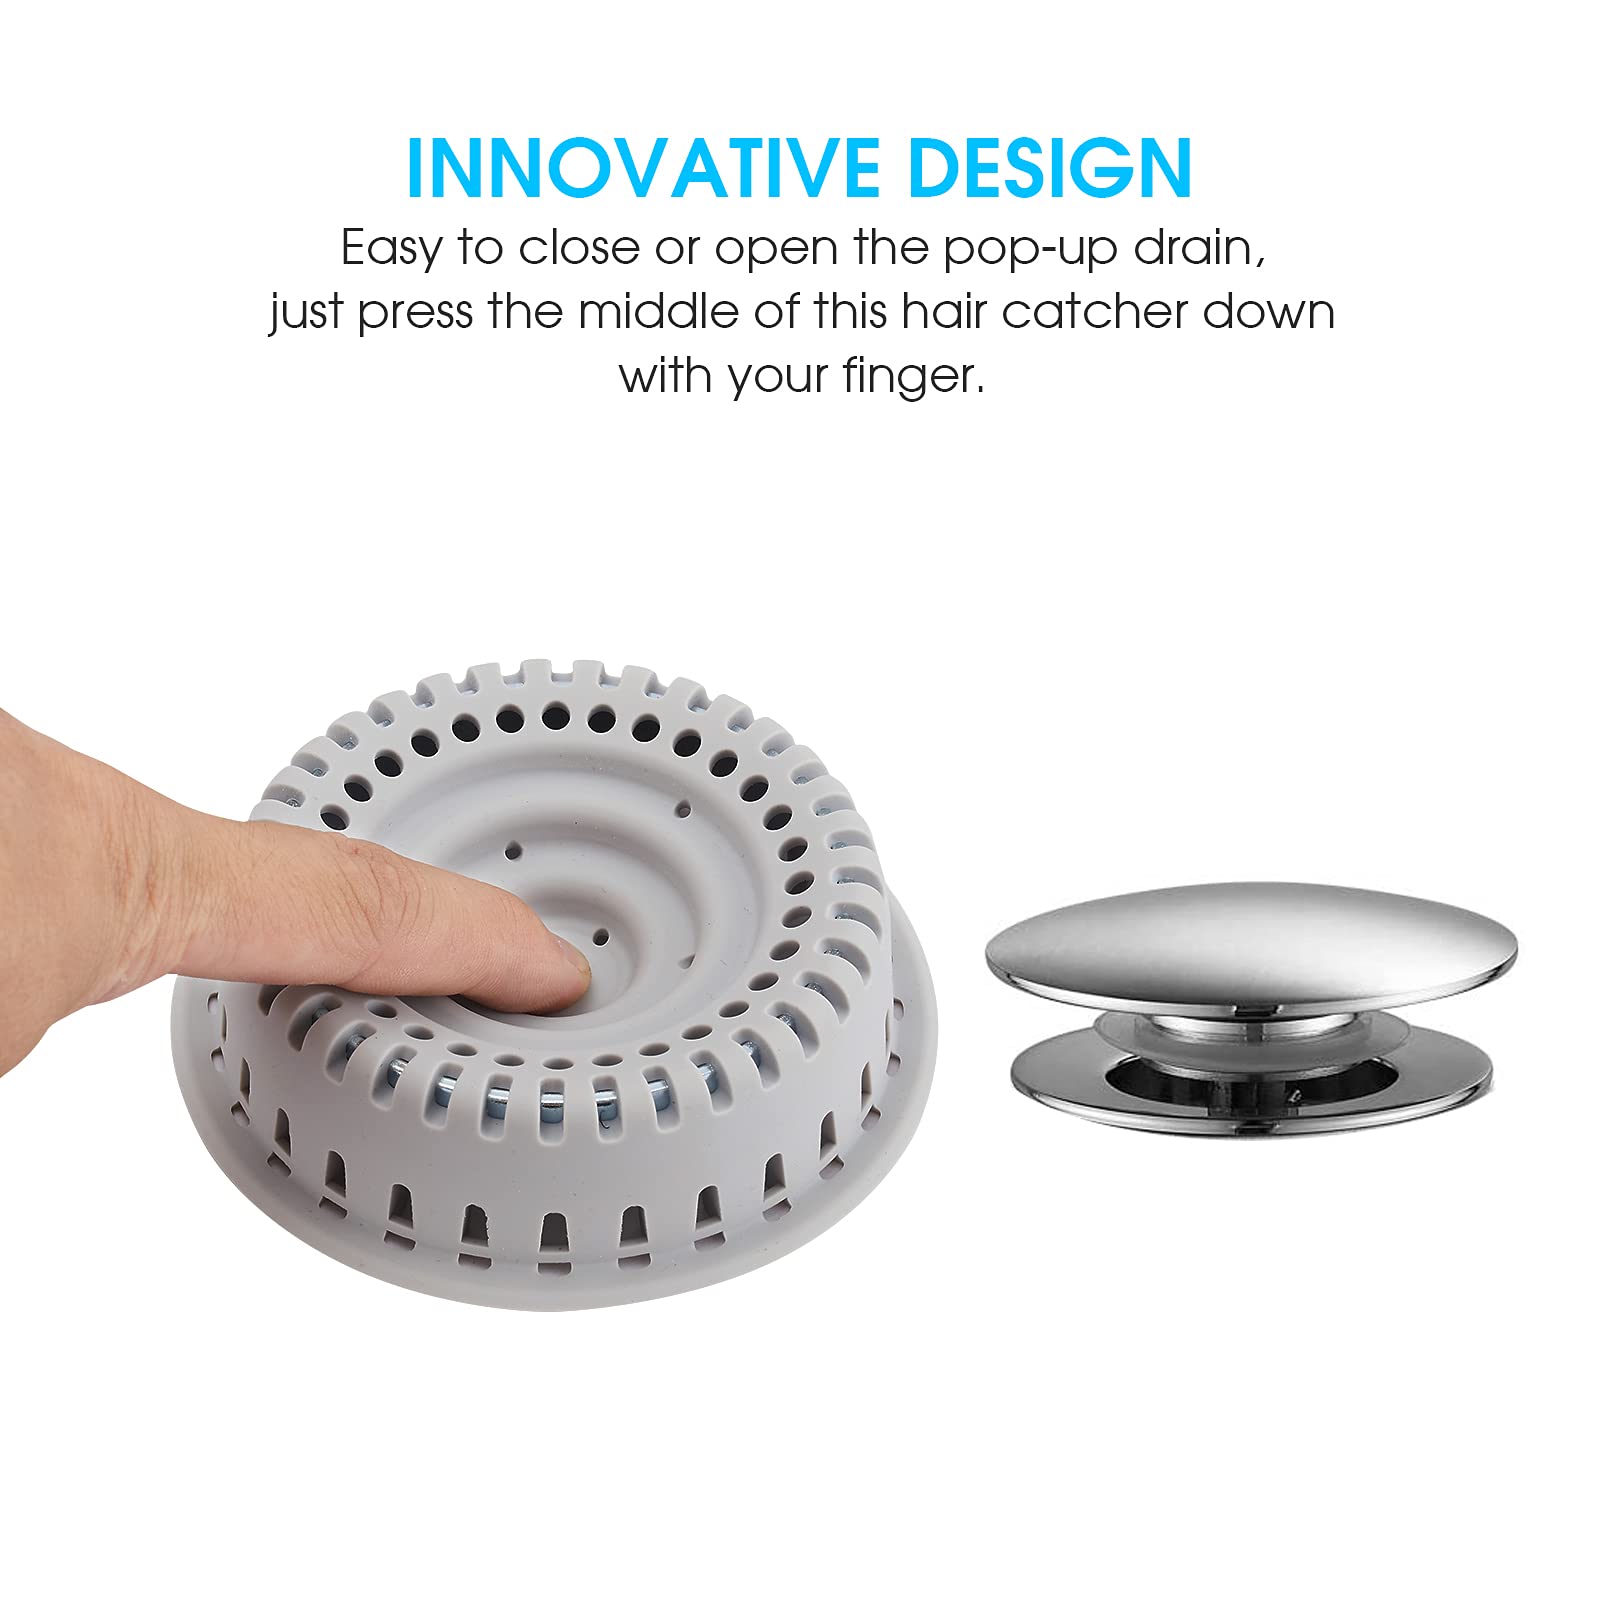 Aojuxix Drain Hair Catcher, Upgraded Protector with Silicone & Stainless Metal Designed for Pop-Up and Regular, Effective Without Slowing Drainage